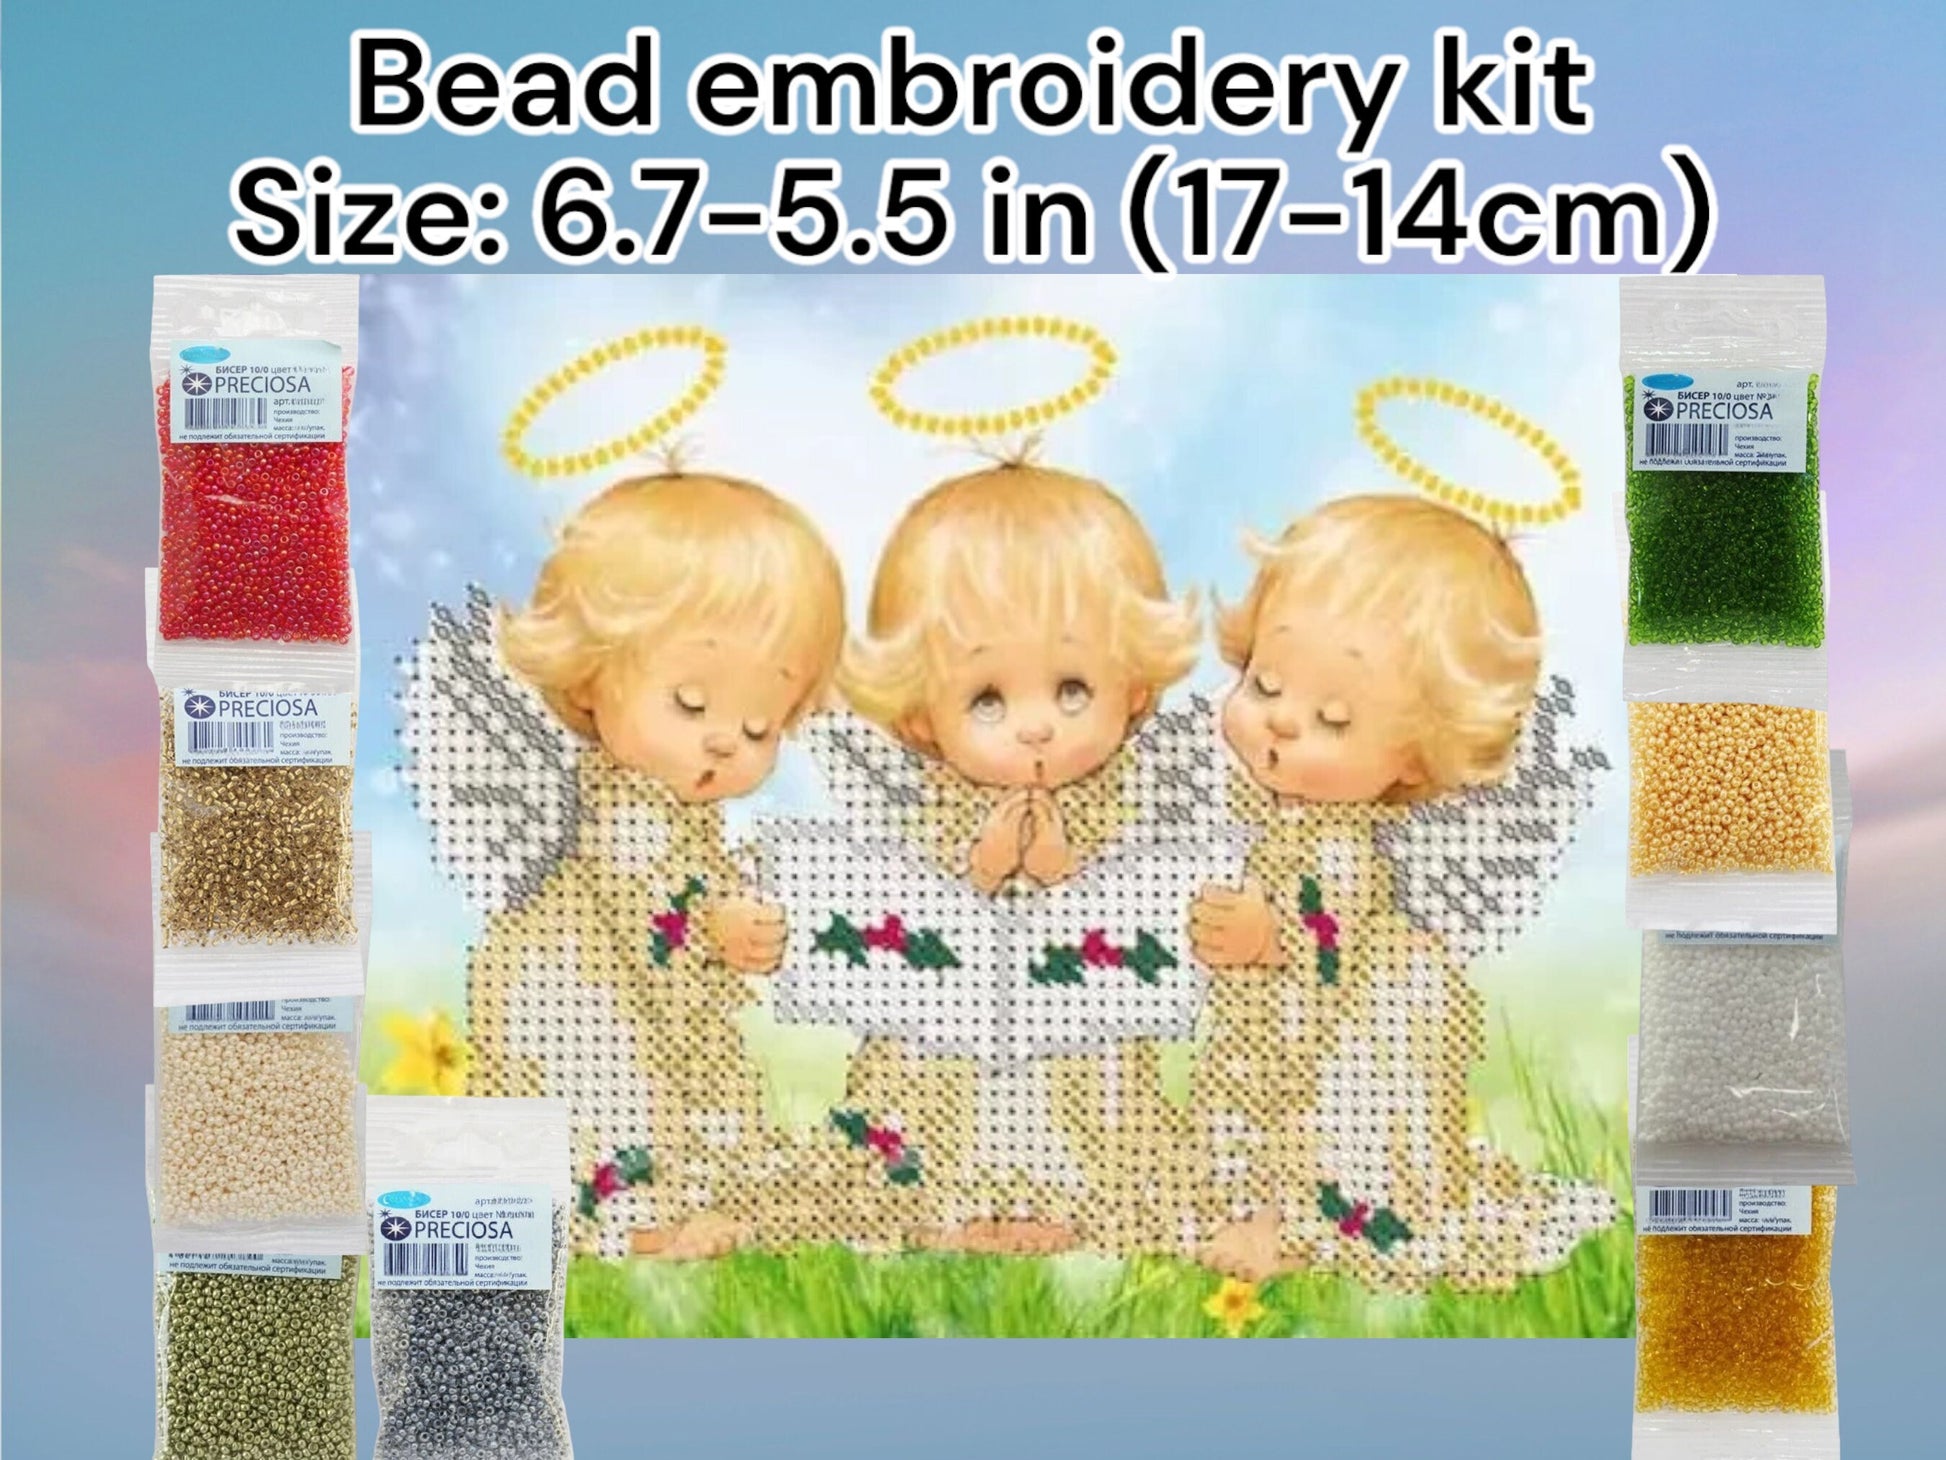 Small Bead embroidery kit "Сhoir of angels". Size: 6.7-5.5 in (17-14cm) - VadymShop